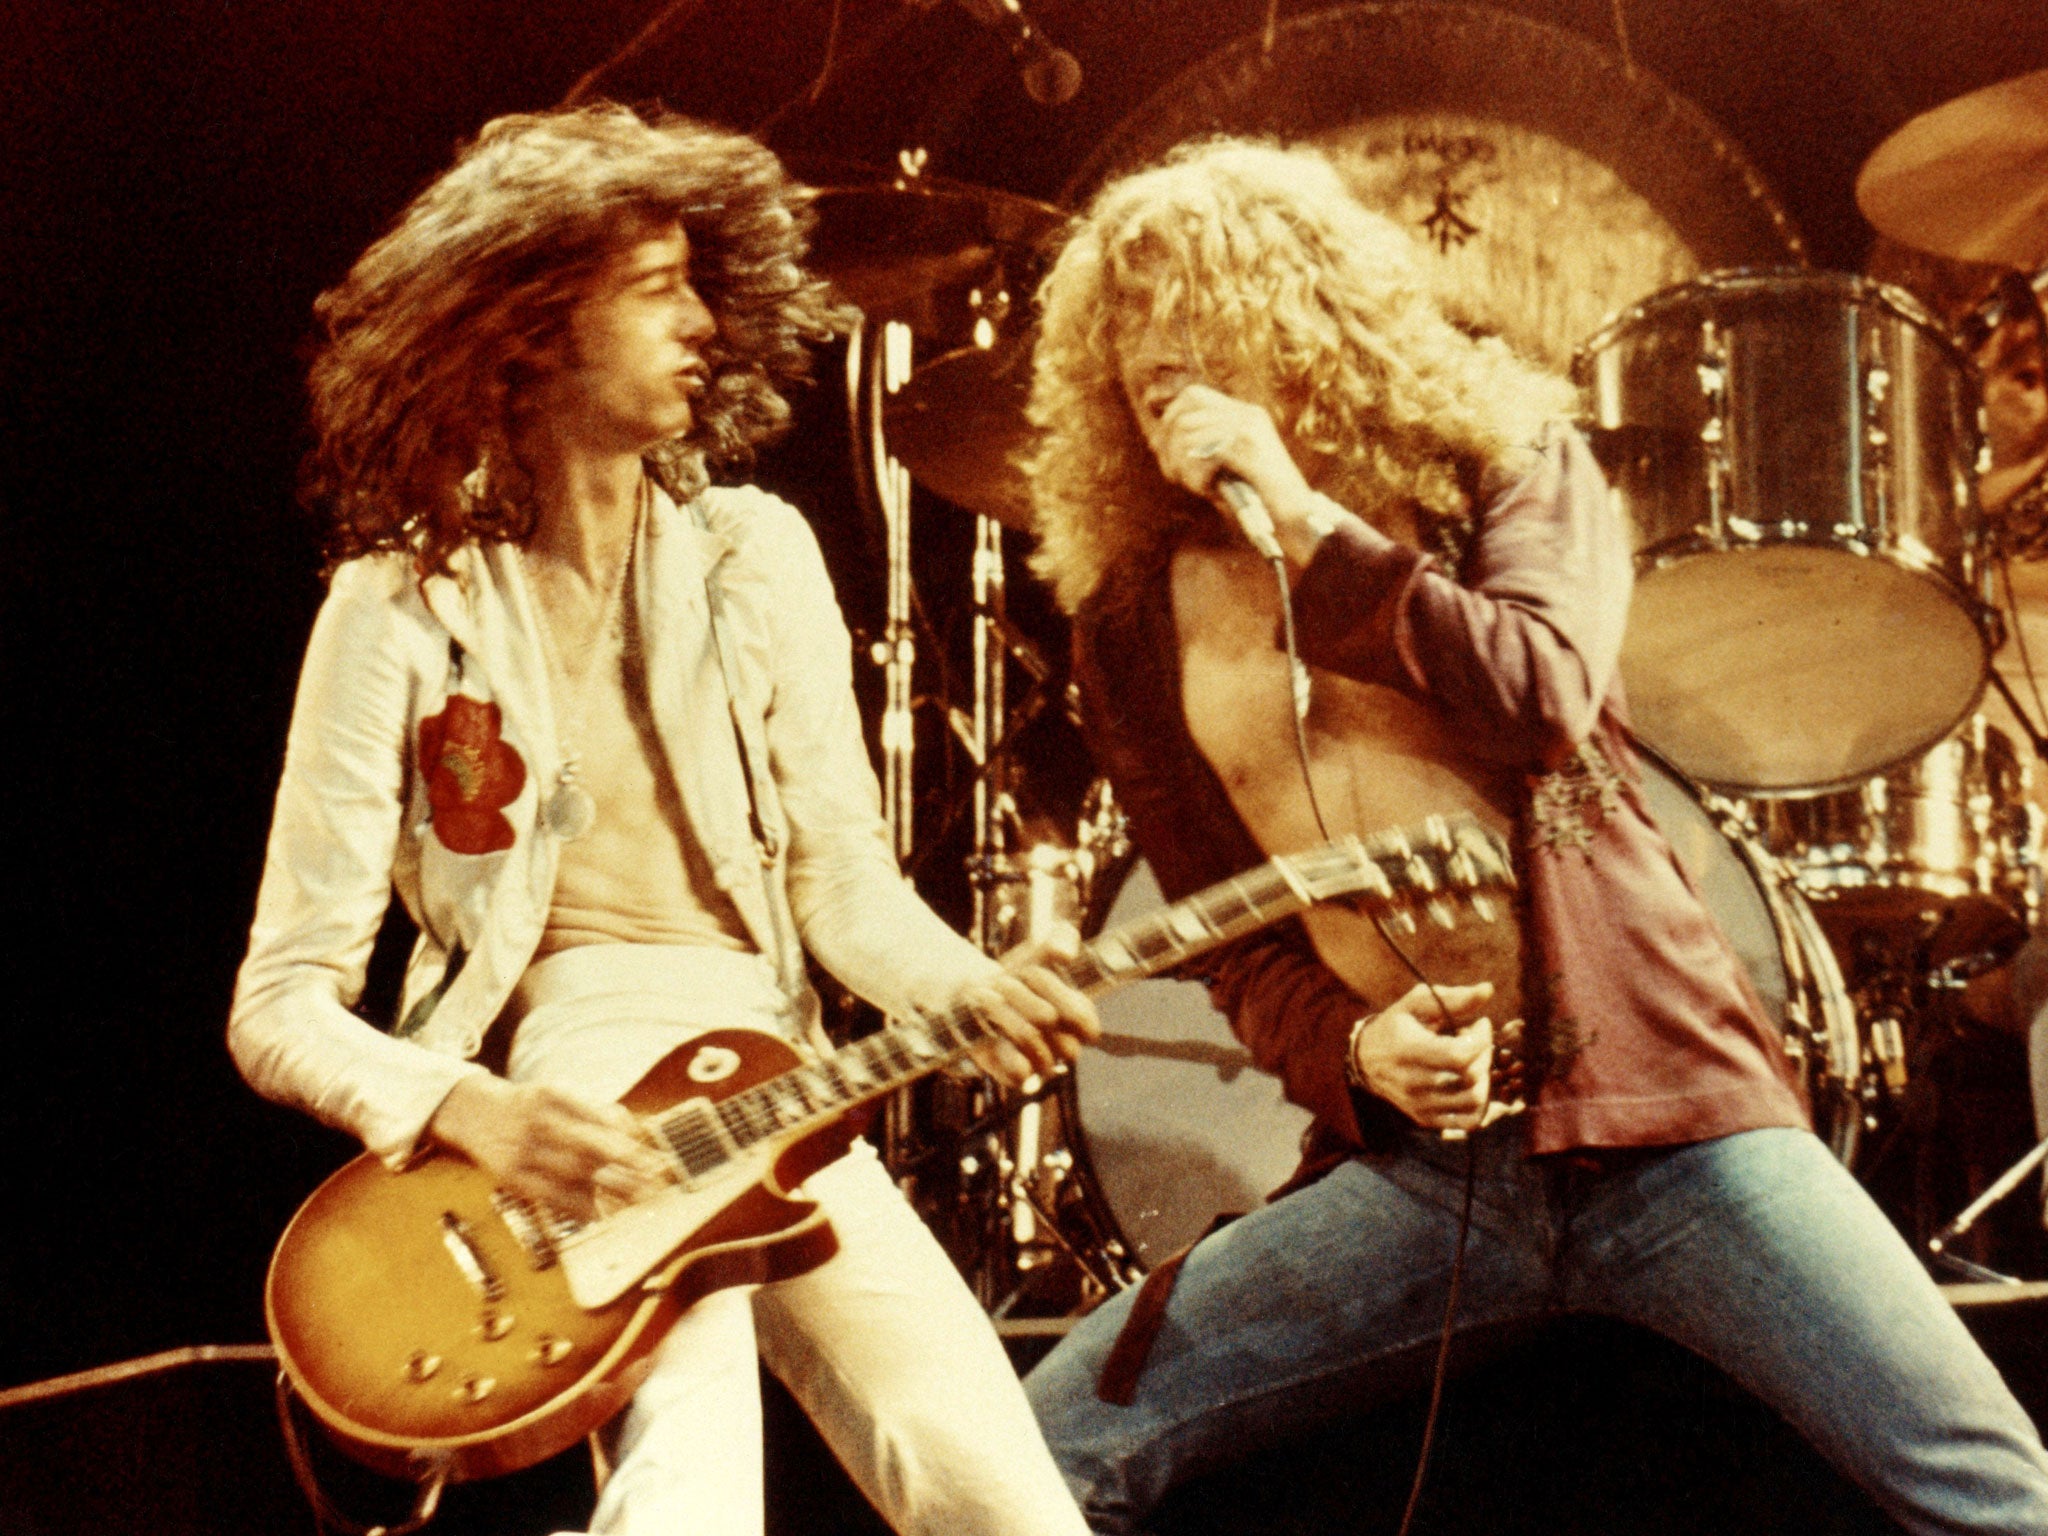 Jimmy Page and Robert Plant perform a Led Zeppelin gig in 1976